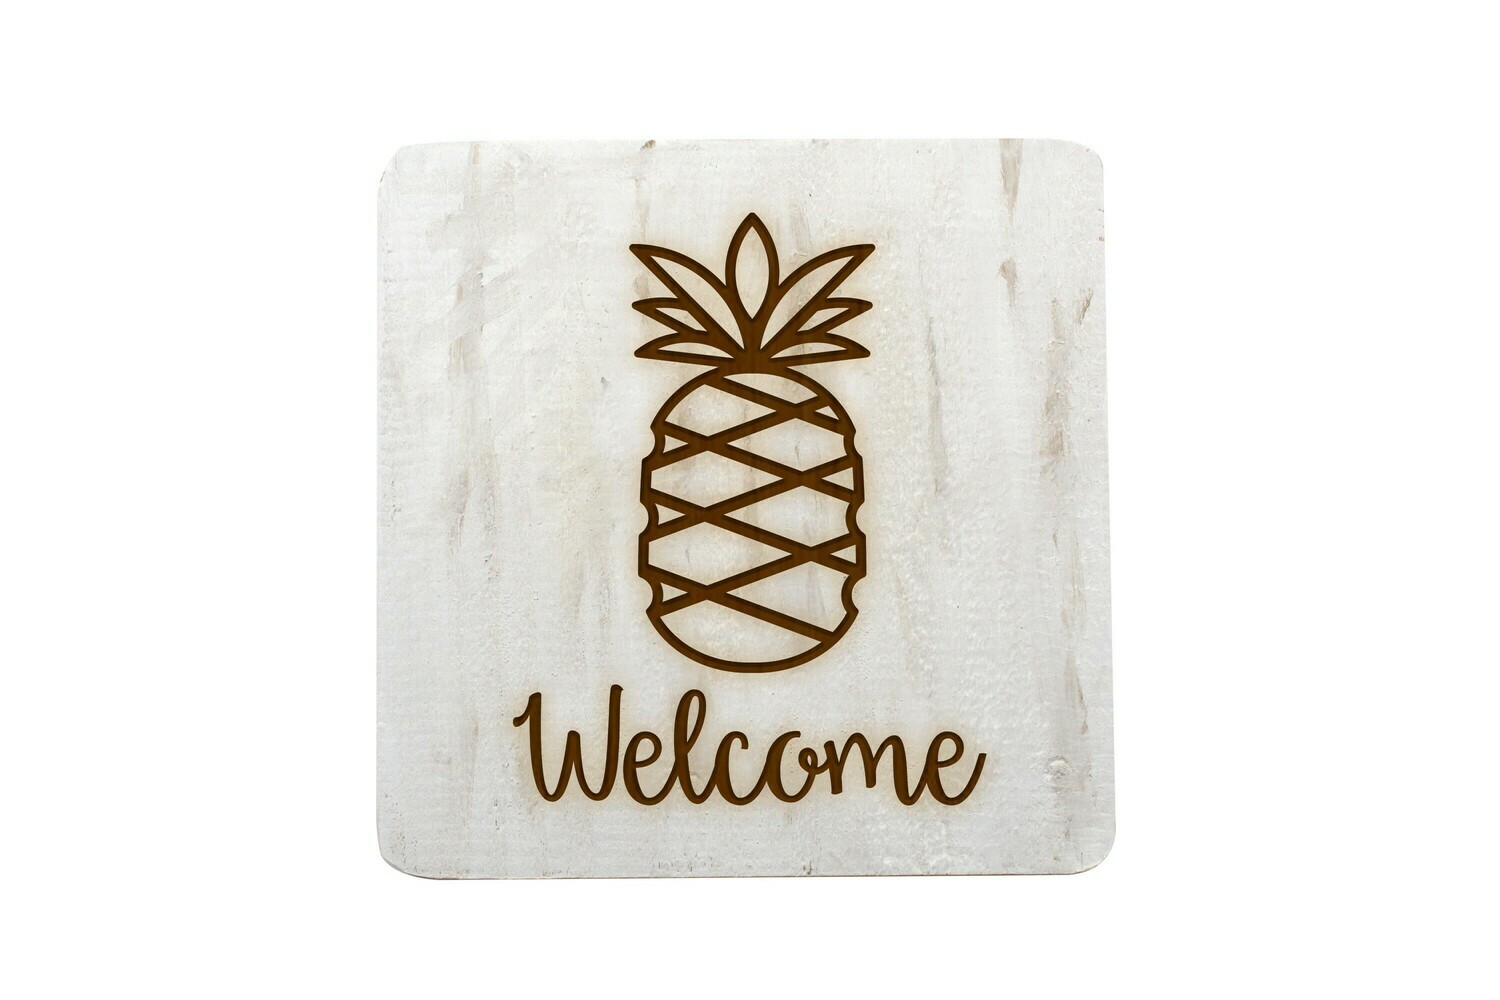 Pineapple with Welcome or Your Word Choice Hand-Painted Wood Coaster Set.